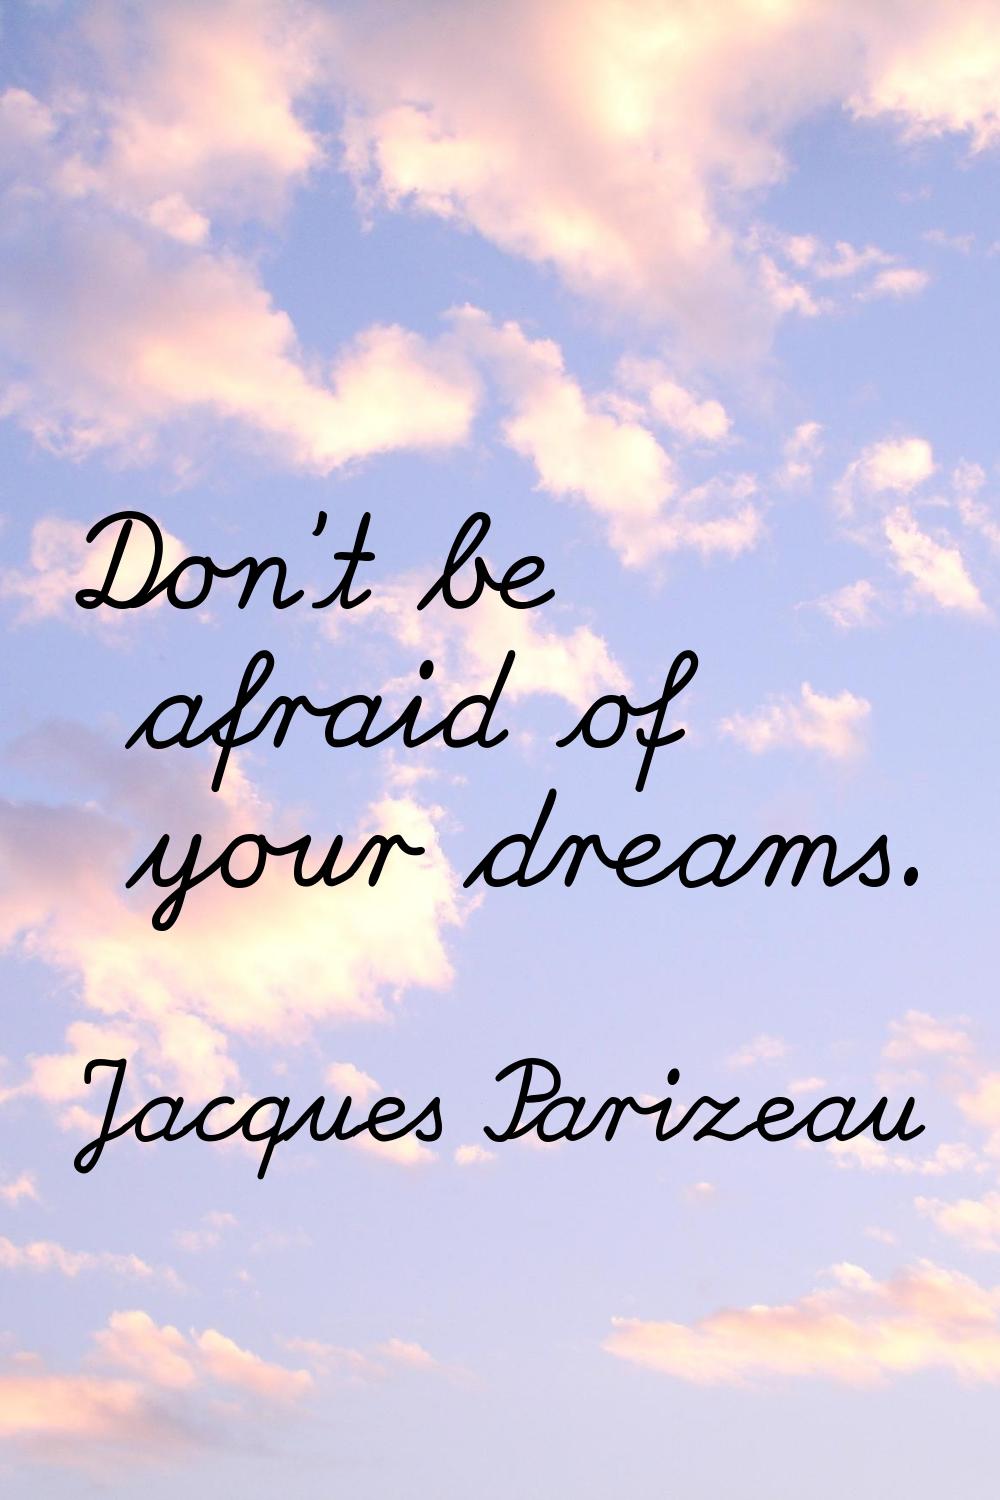 Don't be afraid of your dreams.